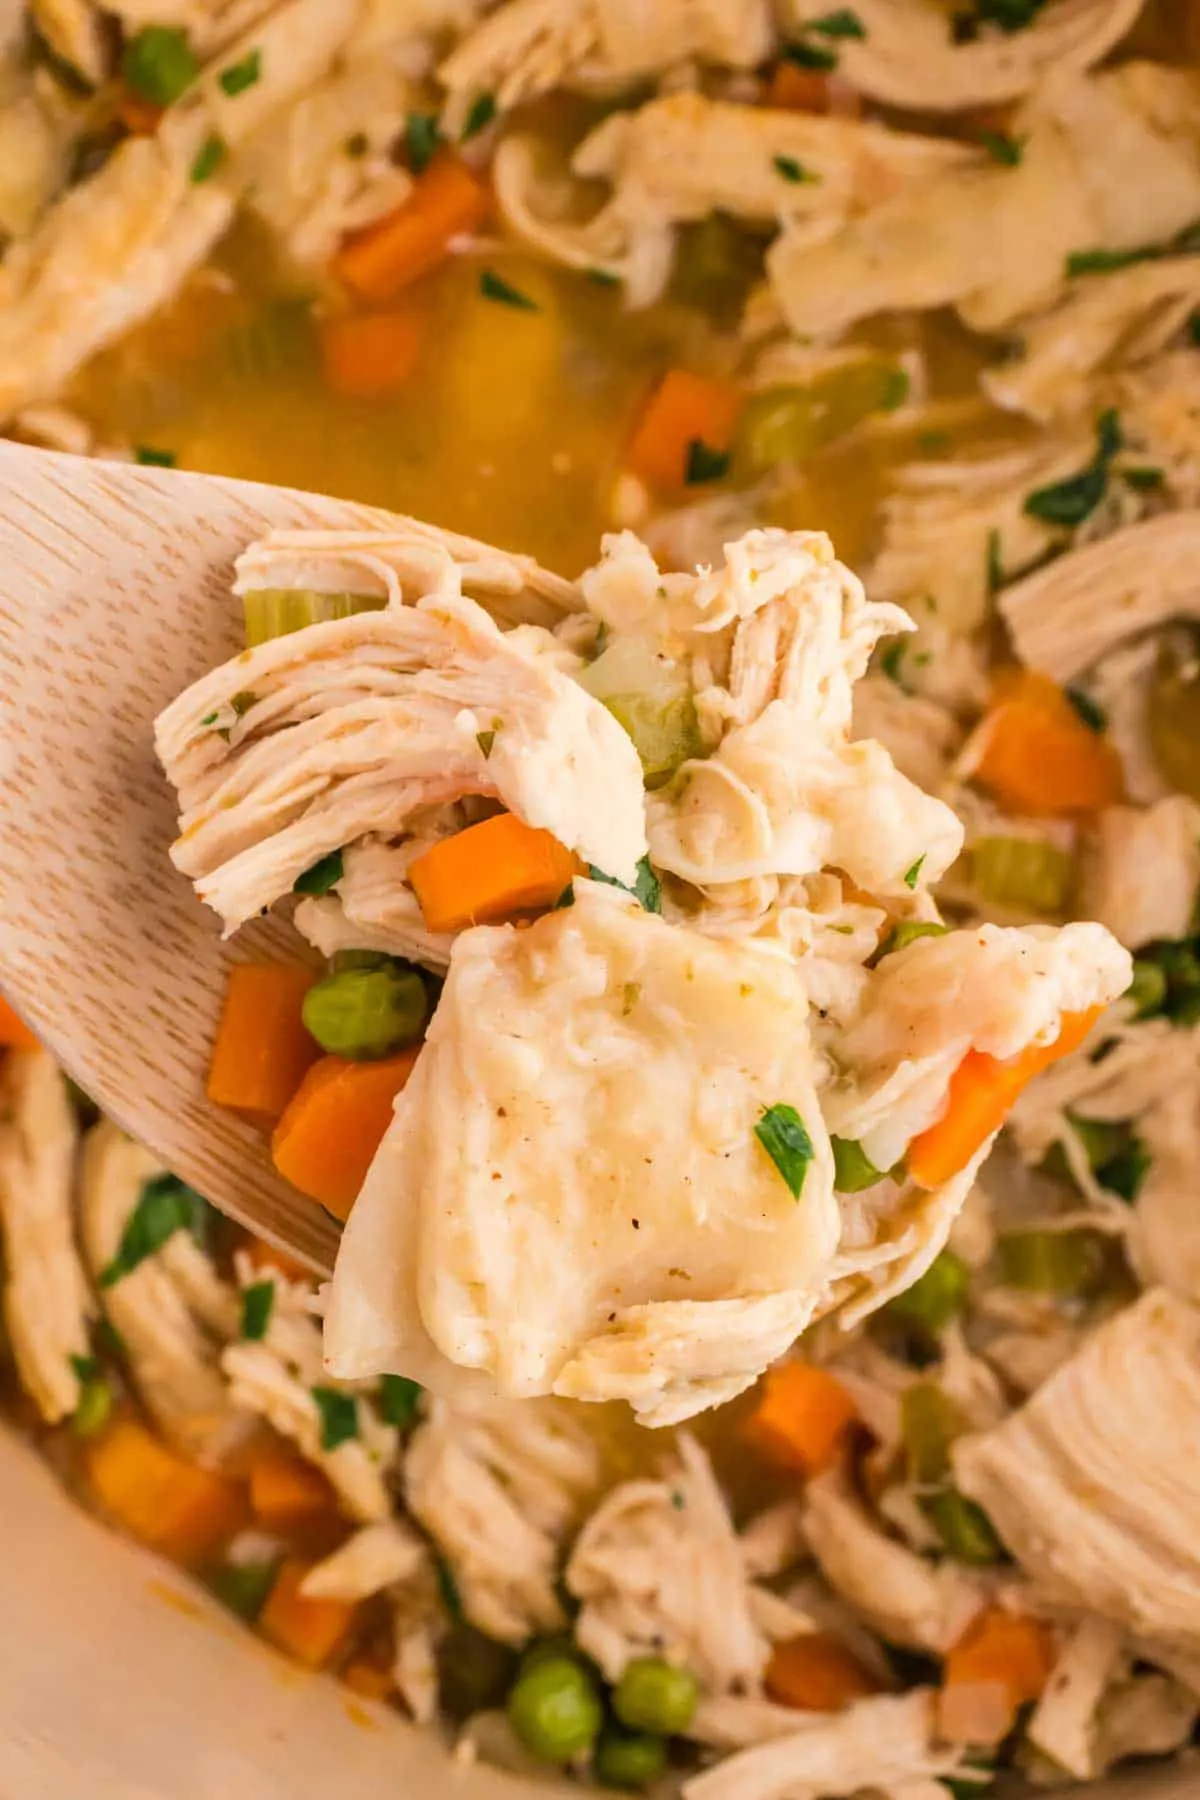 Chicken and Dumplings with Tortillas is a twist on a classic comfort food recipe loaded with shredded chicken breast, carrots, celery, onion, peas and flour tortilla recipes all cooked in a delicious chicken broth.